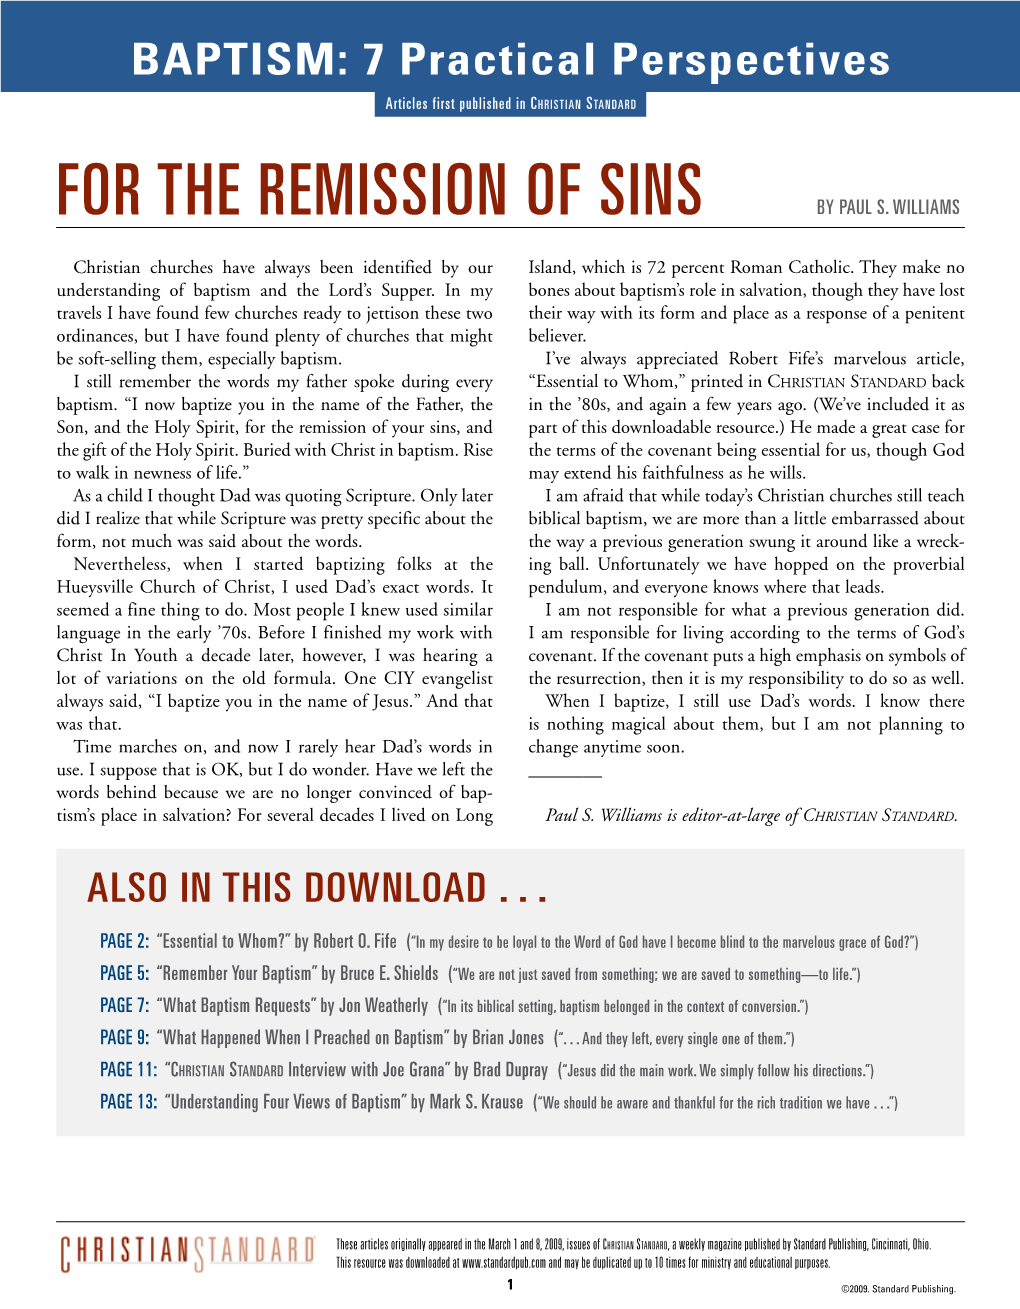 For the Remission of Sins by Paul S